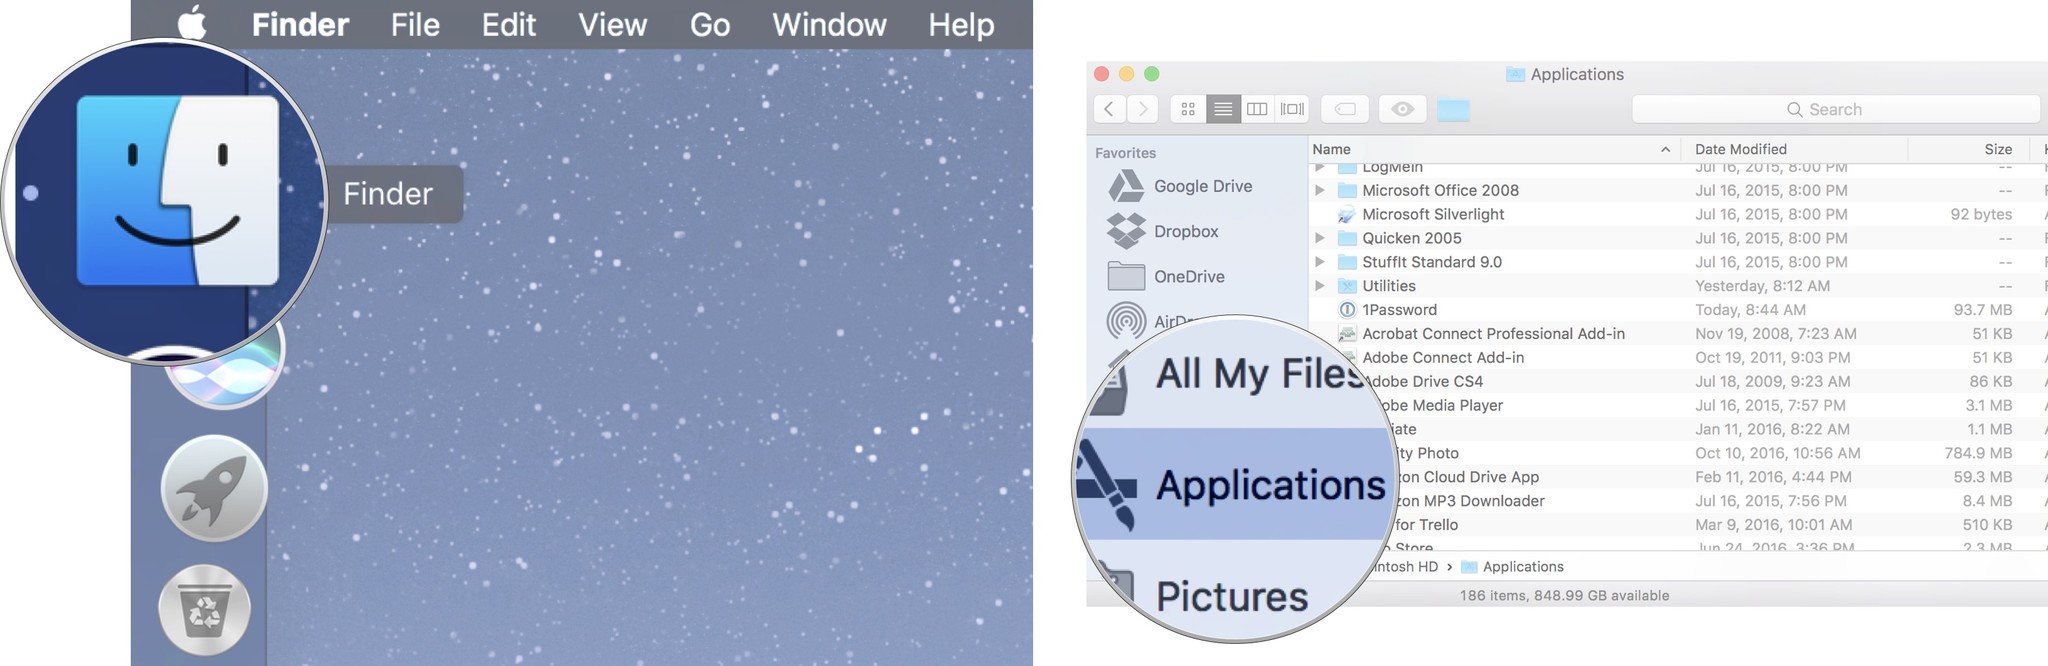 Migrate data from your old Mac to your new Mac showing how to open a Finder window on your old Mac, then click Applications in the sidebar